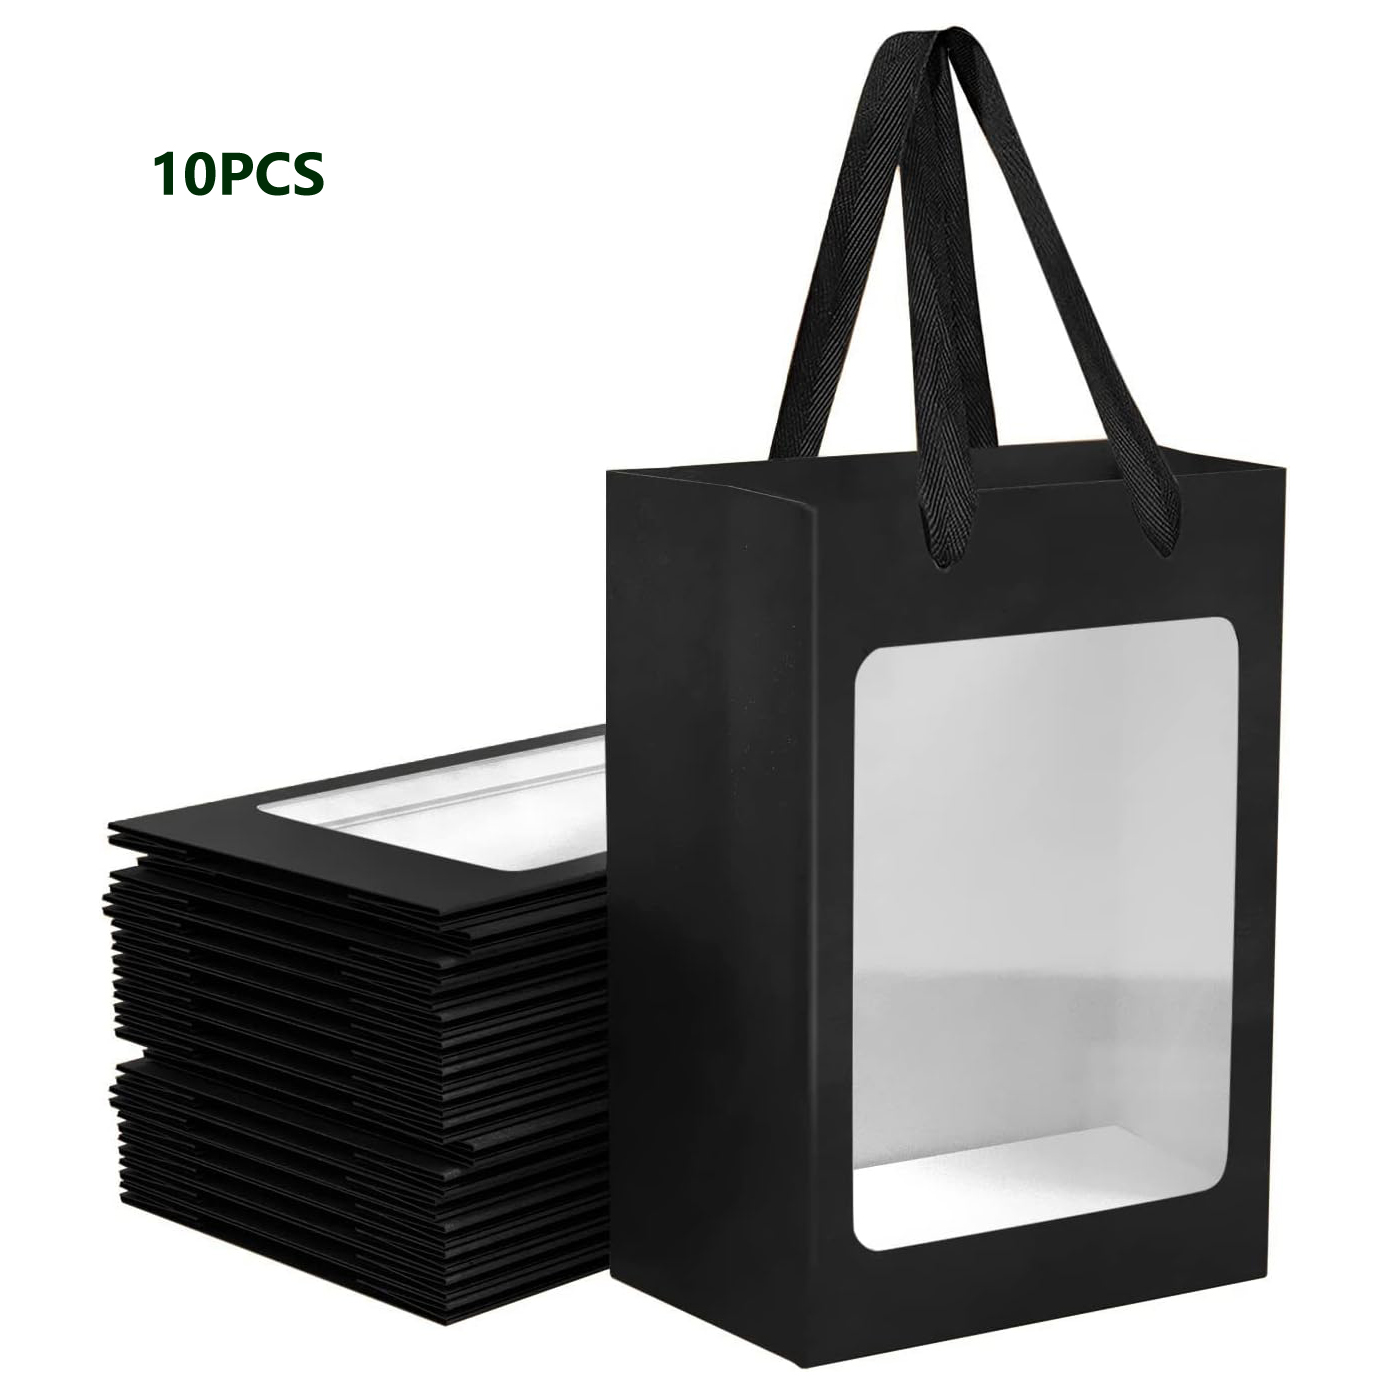 

10pcs Black Paper Gift Bags With Transparent Window, 9.84"x7.0"x5.12" Shopping Bags With Handles For Present, Festivals Party For Retail Stores, Boutique And Supermarkets